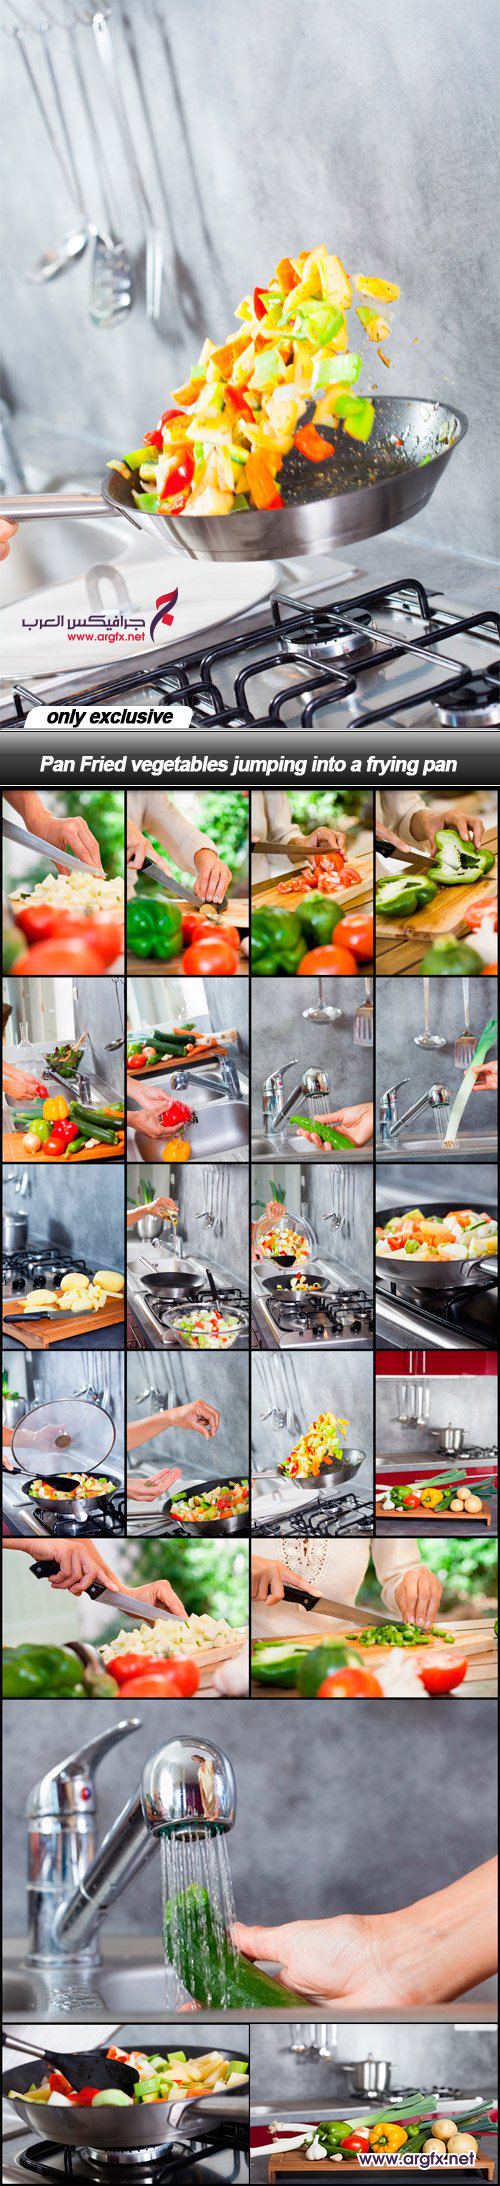  Pan Fried vegetables jumping into a frying pan - 22 UHQ JPEG